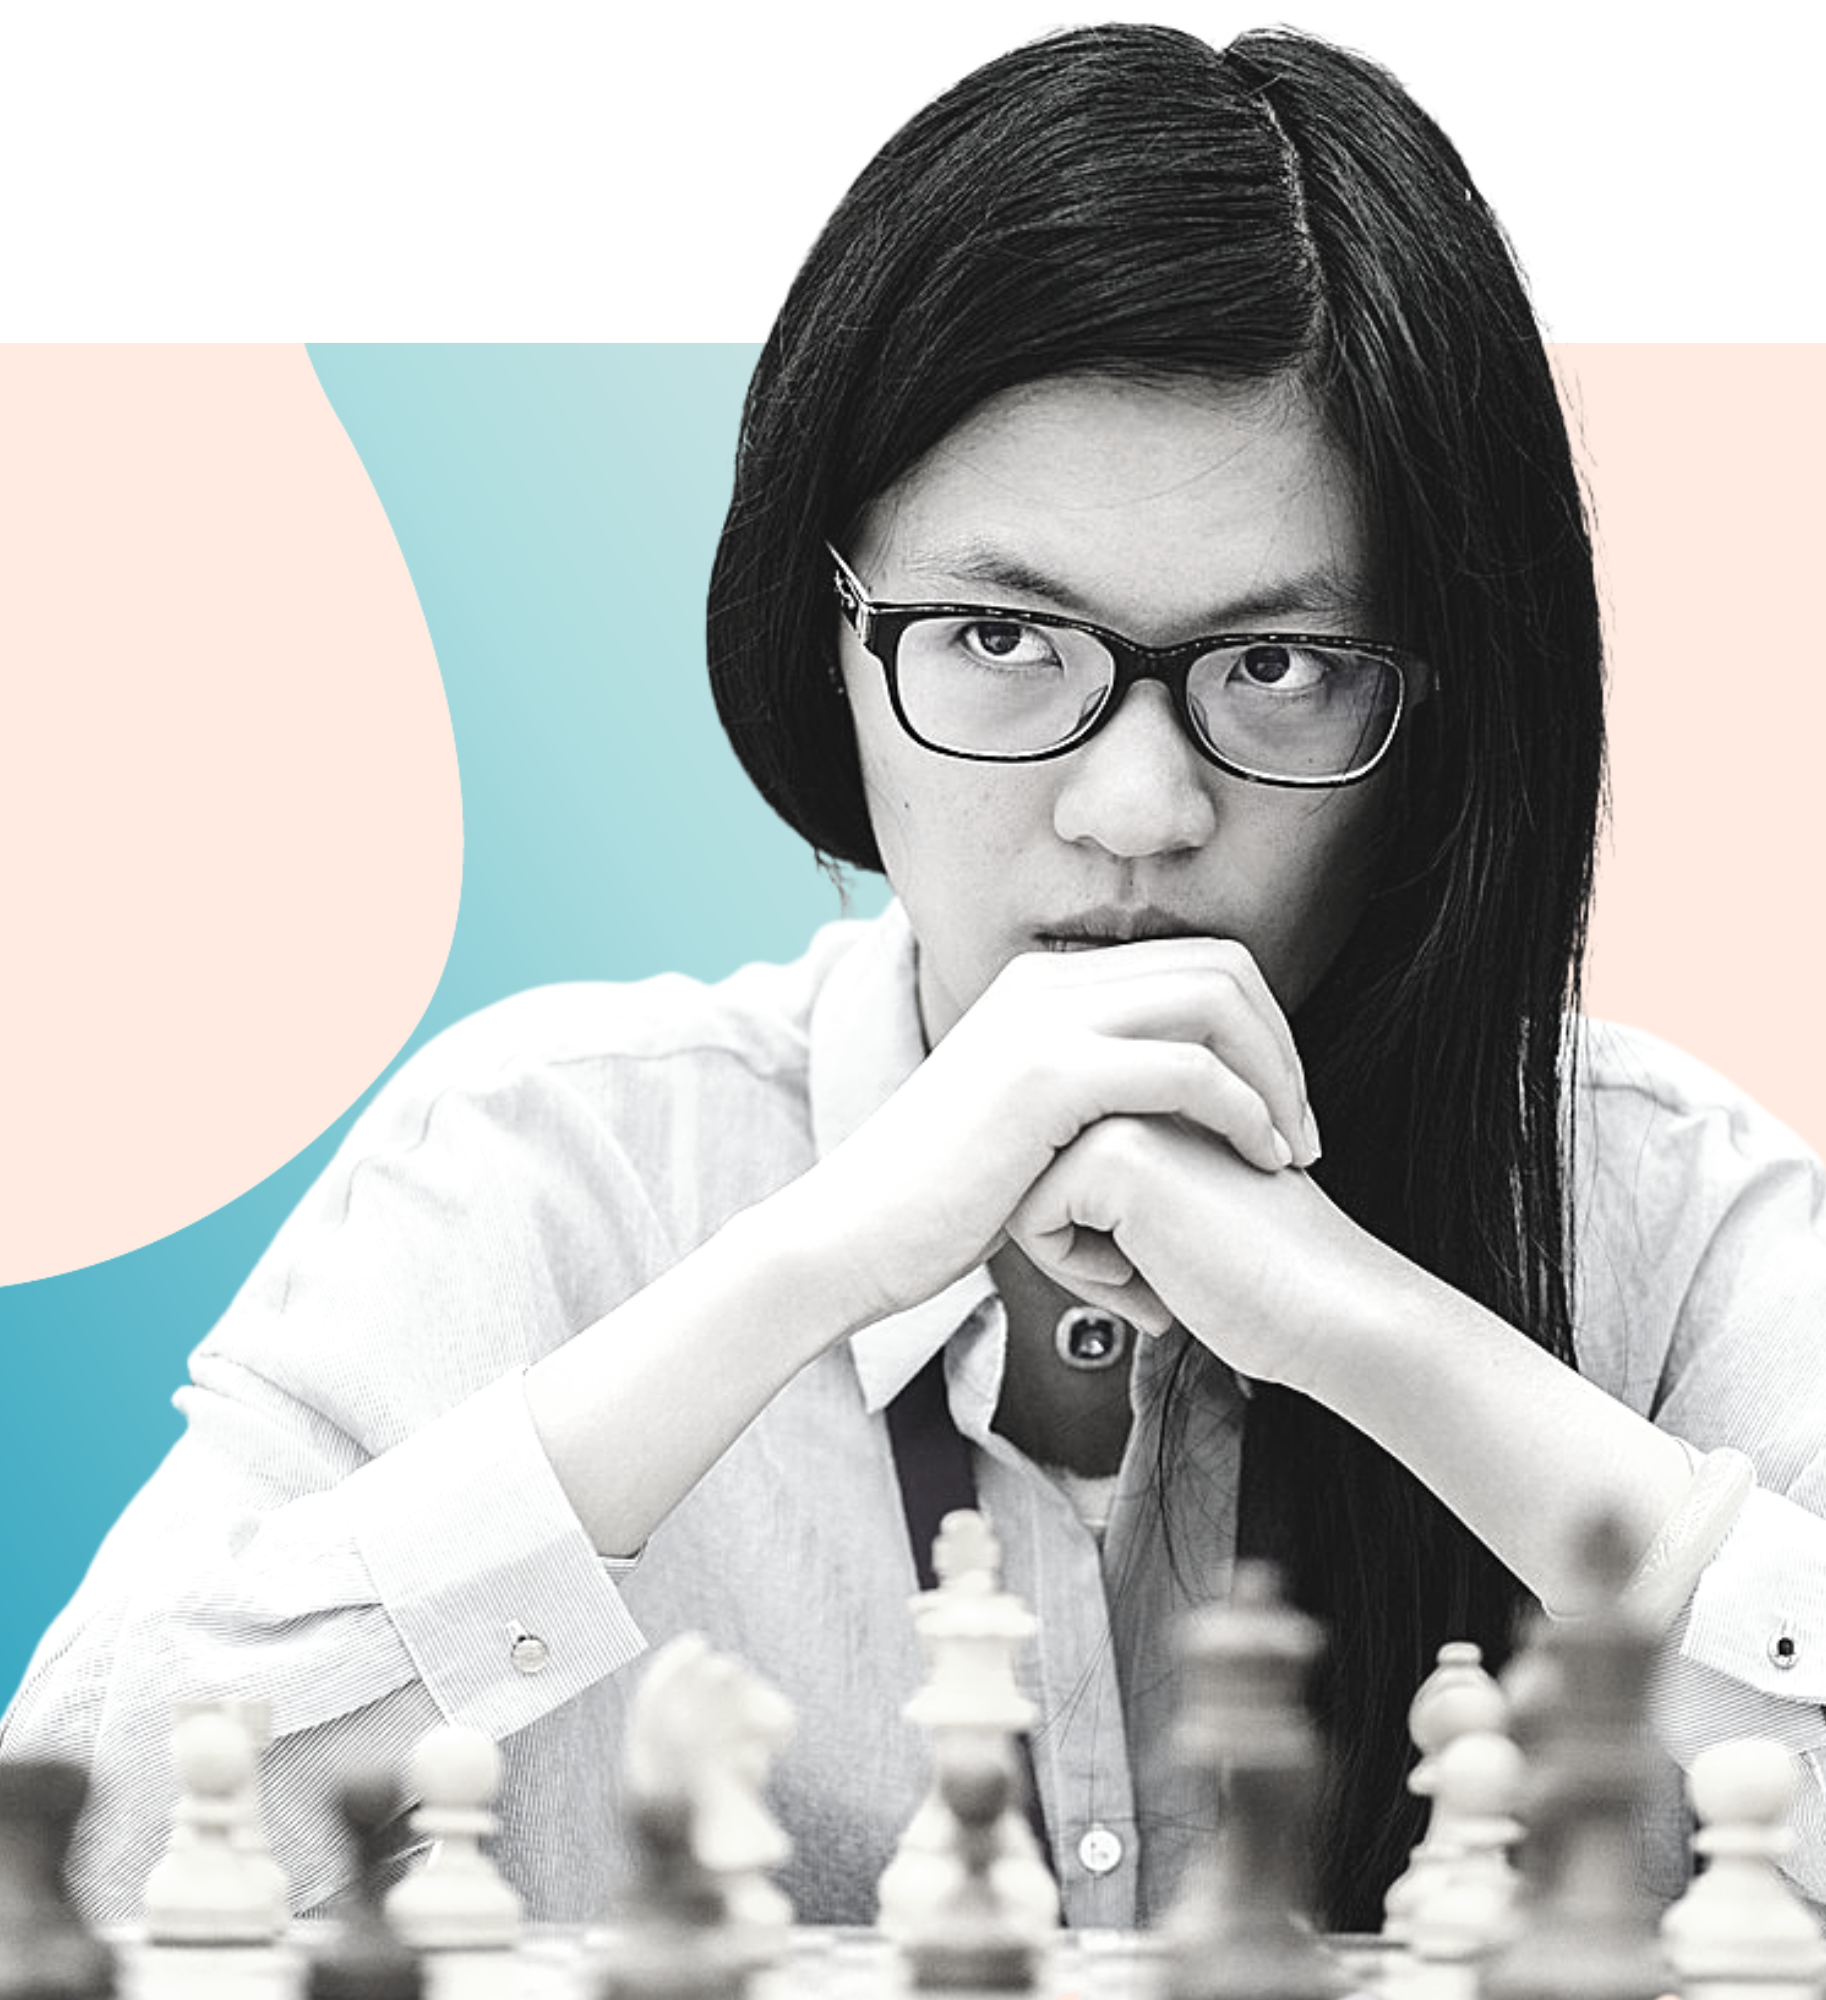 Women's Chess Coverage on X: New FIDE ratings are out! 👀 Eline